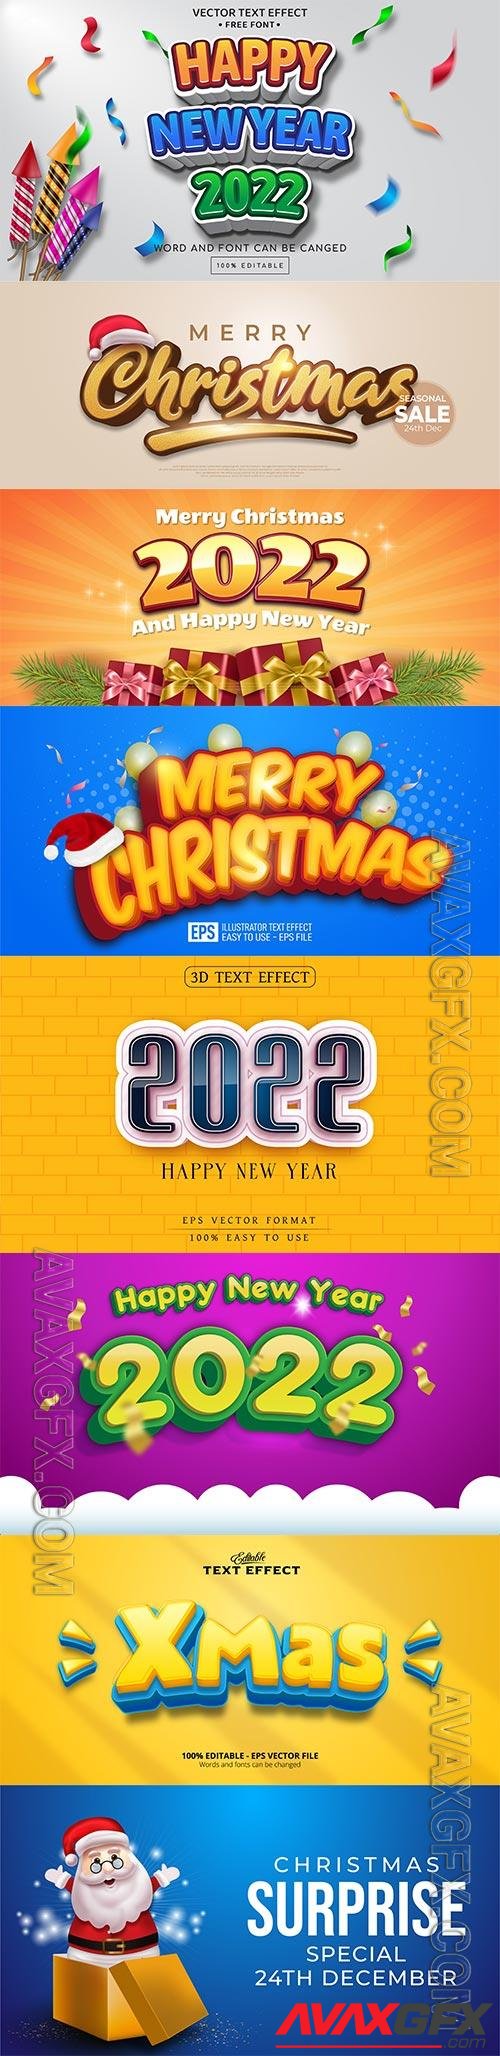 2022 New year and christmas editable text effect vector vol 28